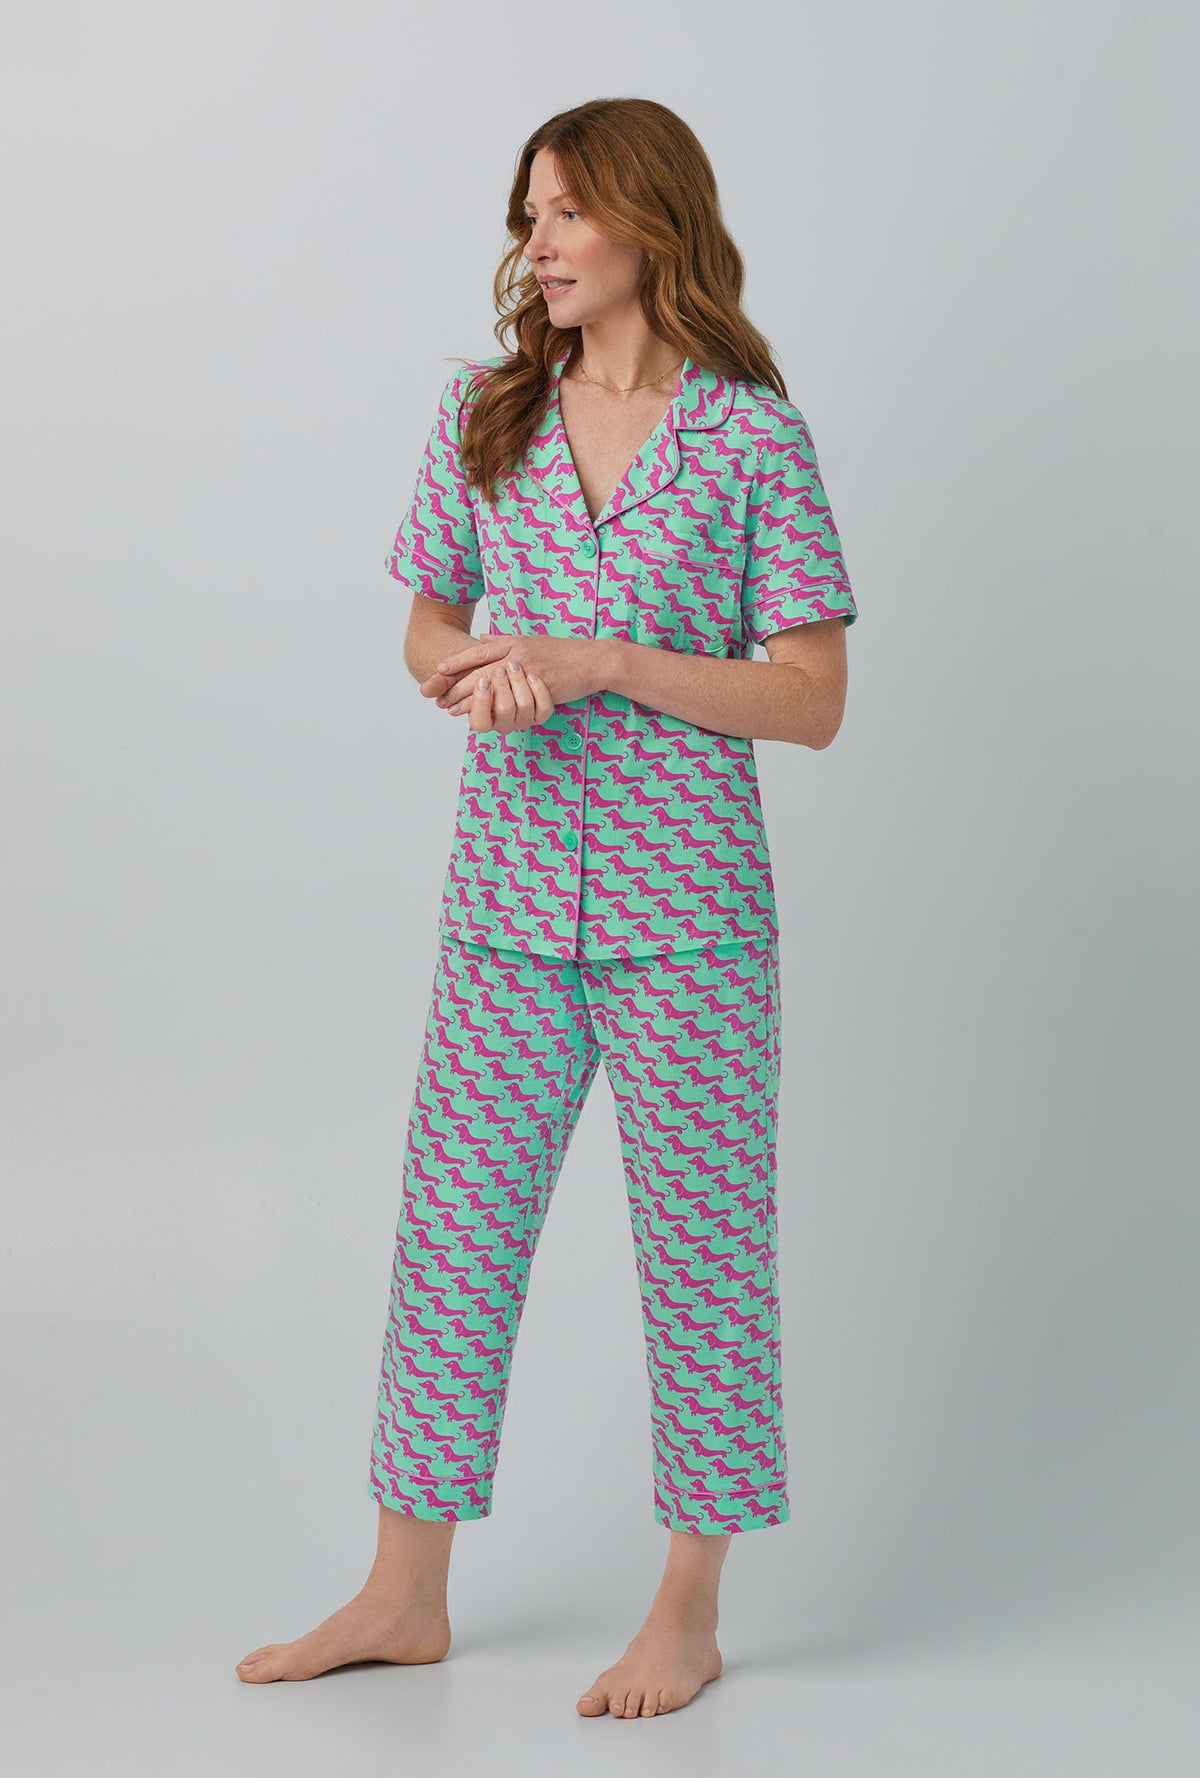 A lady wearing  Short Sleeve Classic Stretch Jersey Cropped PJ Set with Dog Walk  print